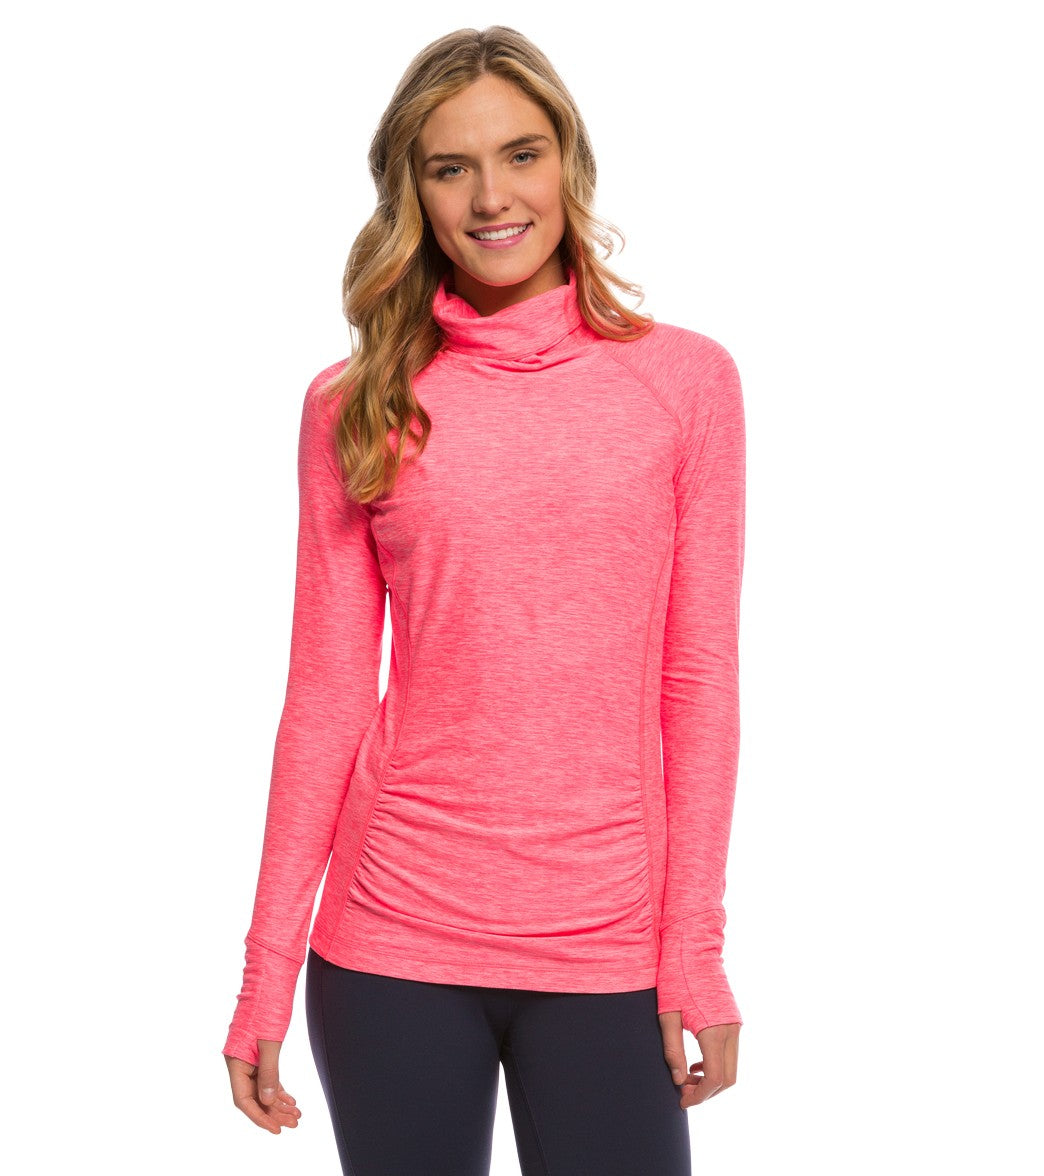 New Balance Women's Space Dye Knit Pullover - Ping Zing Heather Xl - Swimoutlet.com